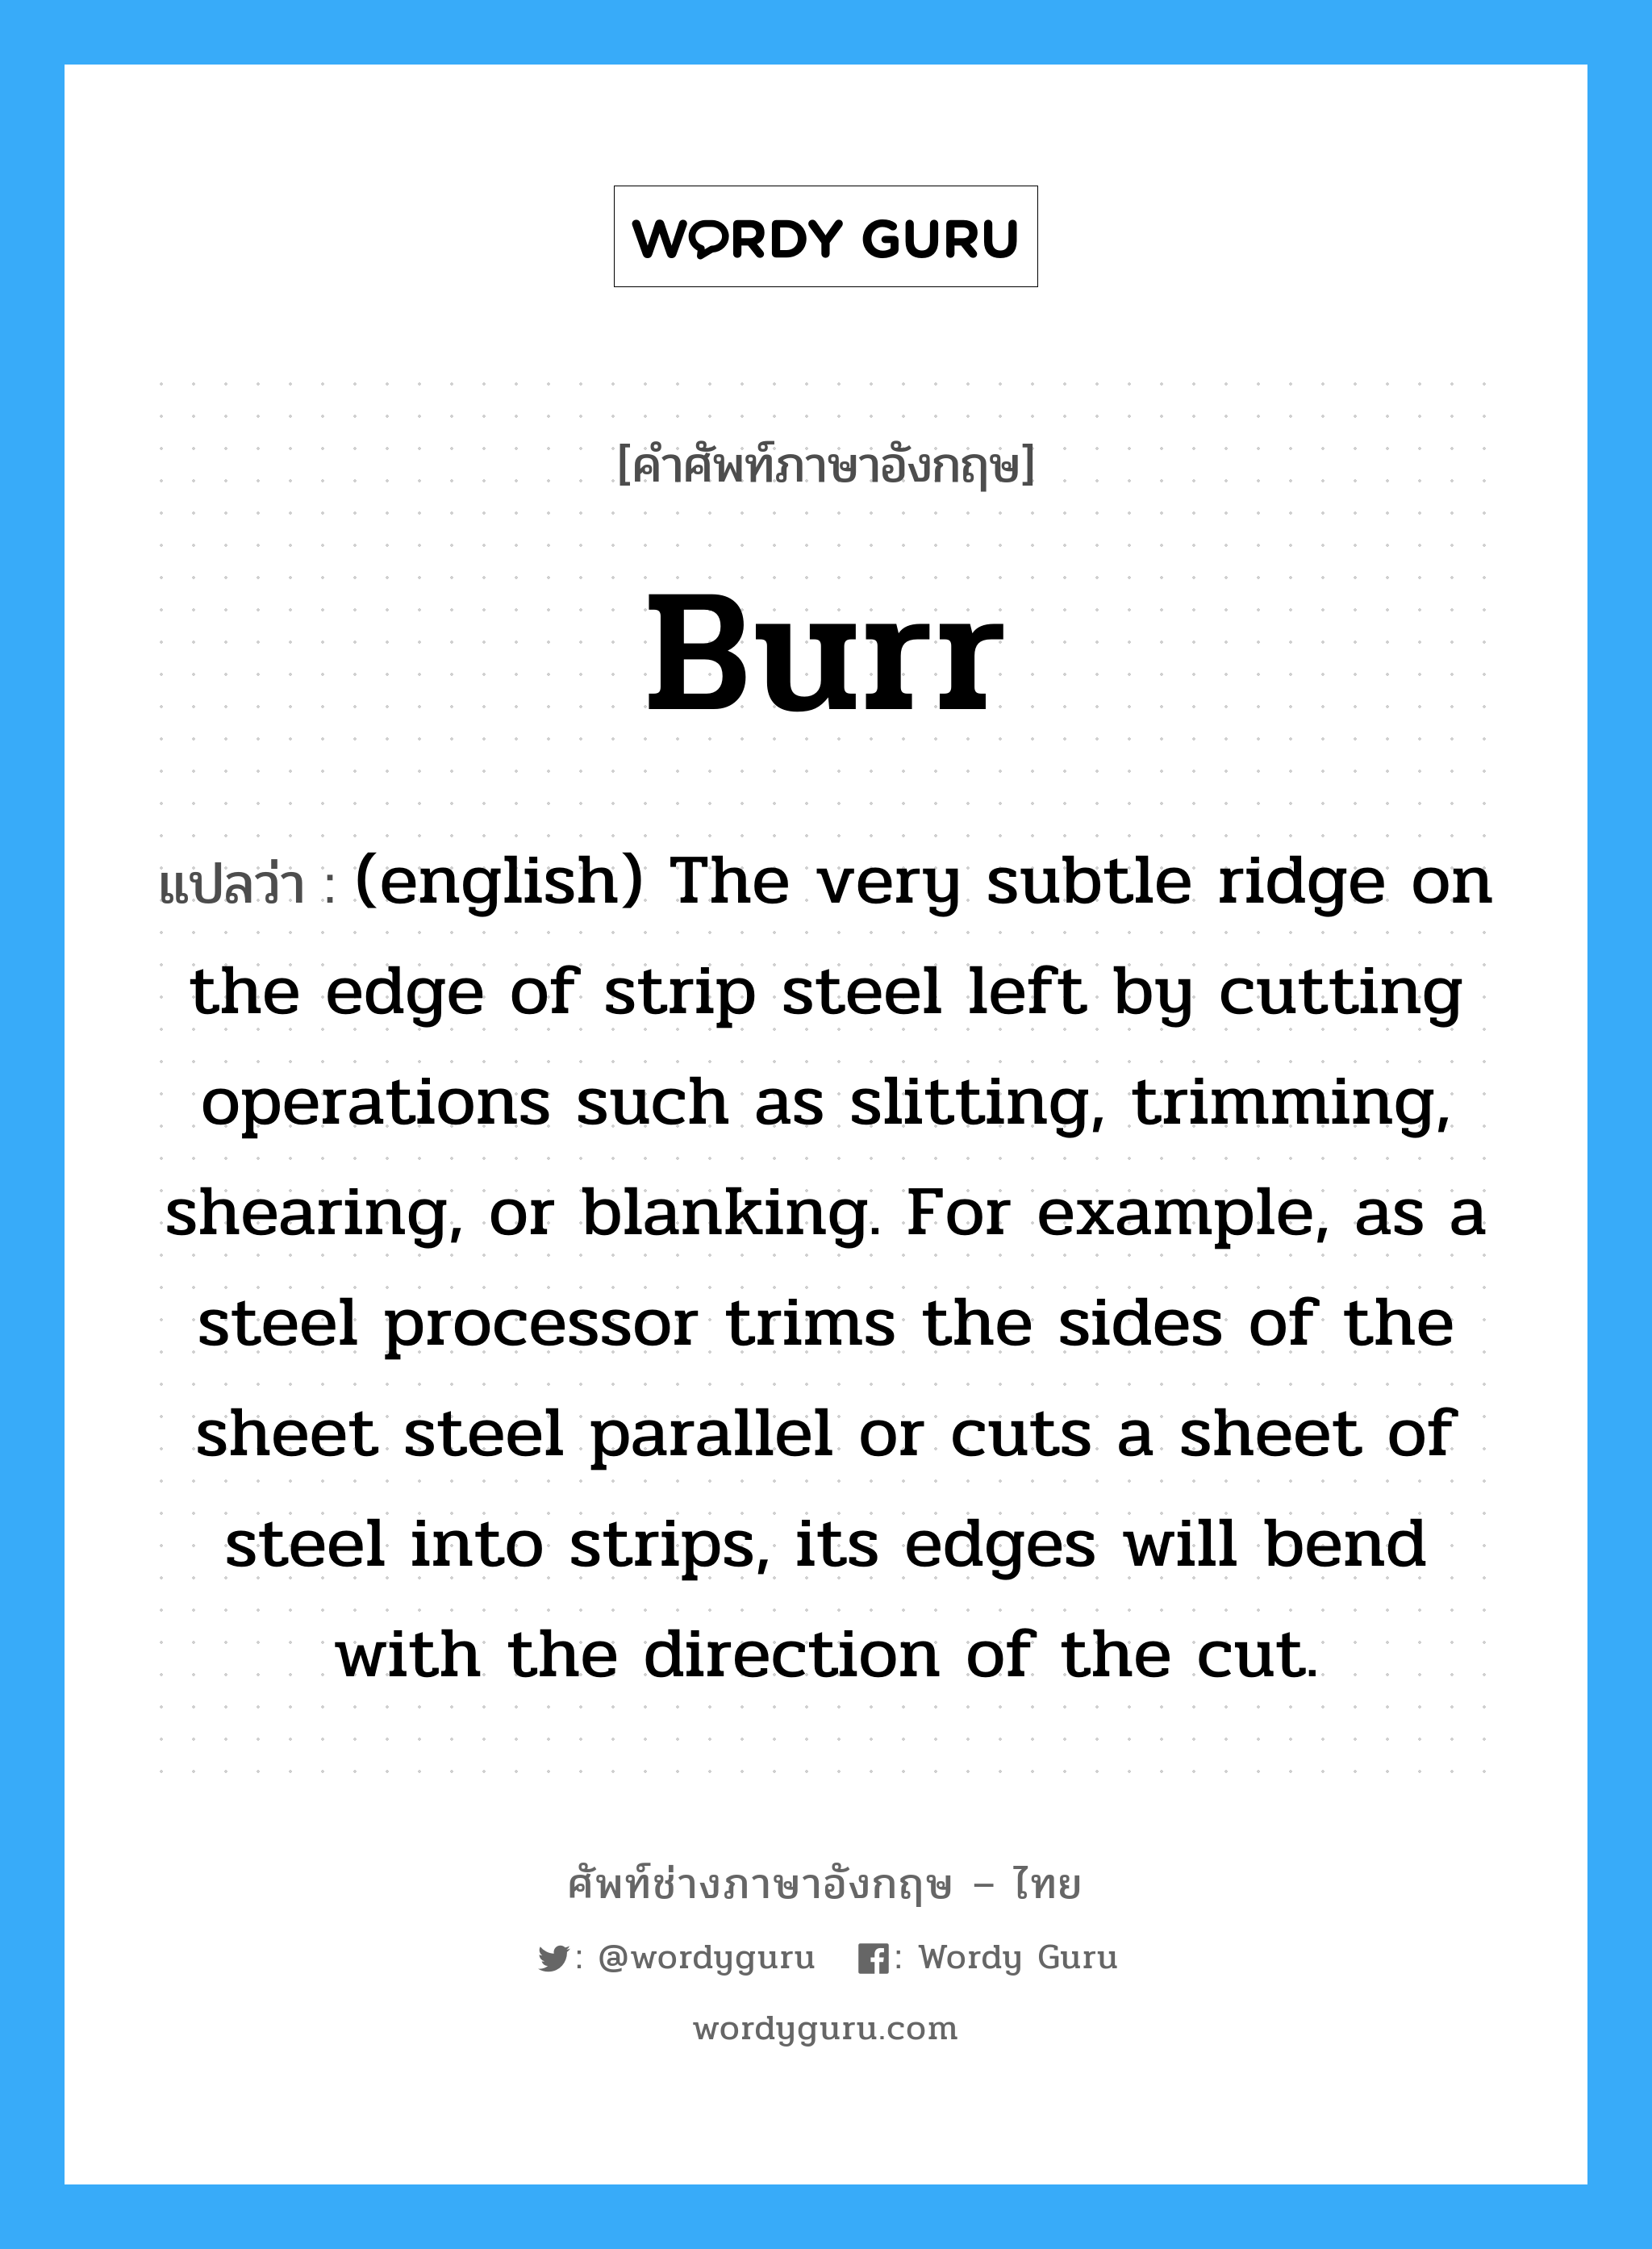 Burr แปลว่า?, คำศัพท์ช่างภาษาอังกฤษ - ไทย Burr คำศัพท์ภาษาอังกฤษ Burr แปลว่า (english) The very subtle ridge on the edge of strip steel left by cutting operations such as slitting, trimming, shearing, or blanking. For example, as a steel processor trims the sides of the sheet steel parallel or cuts a sheet of steel into strips, its edges will bend with the direction of the cut.